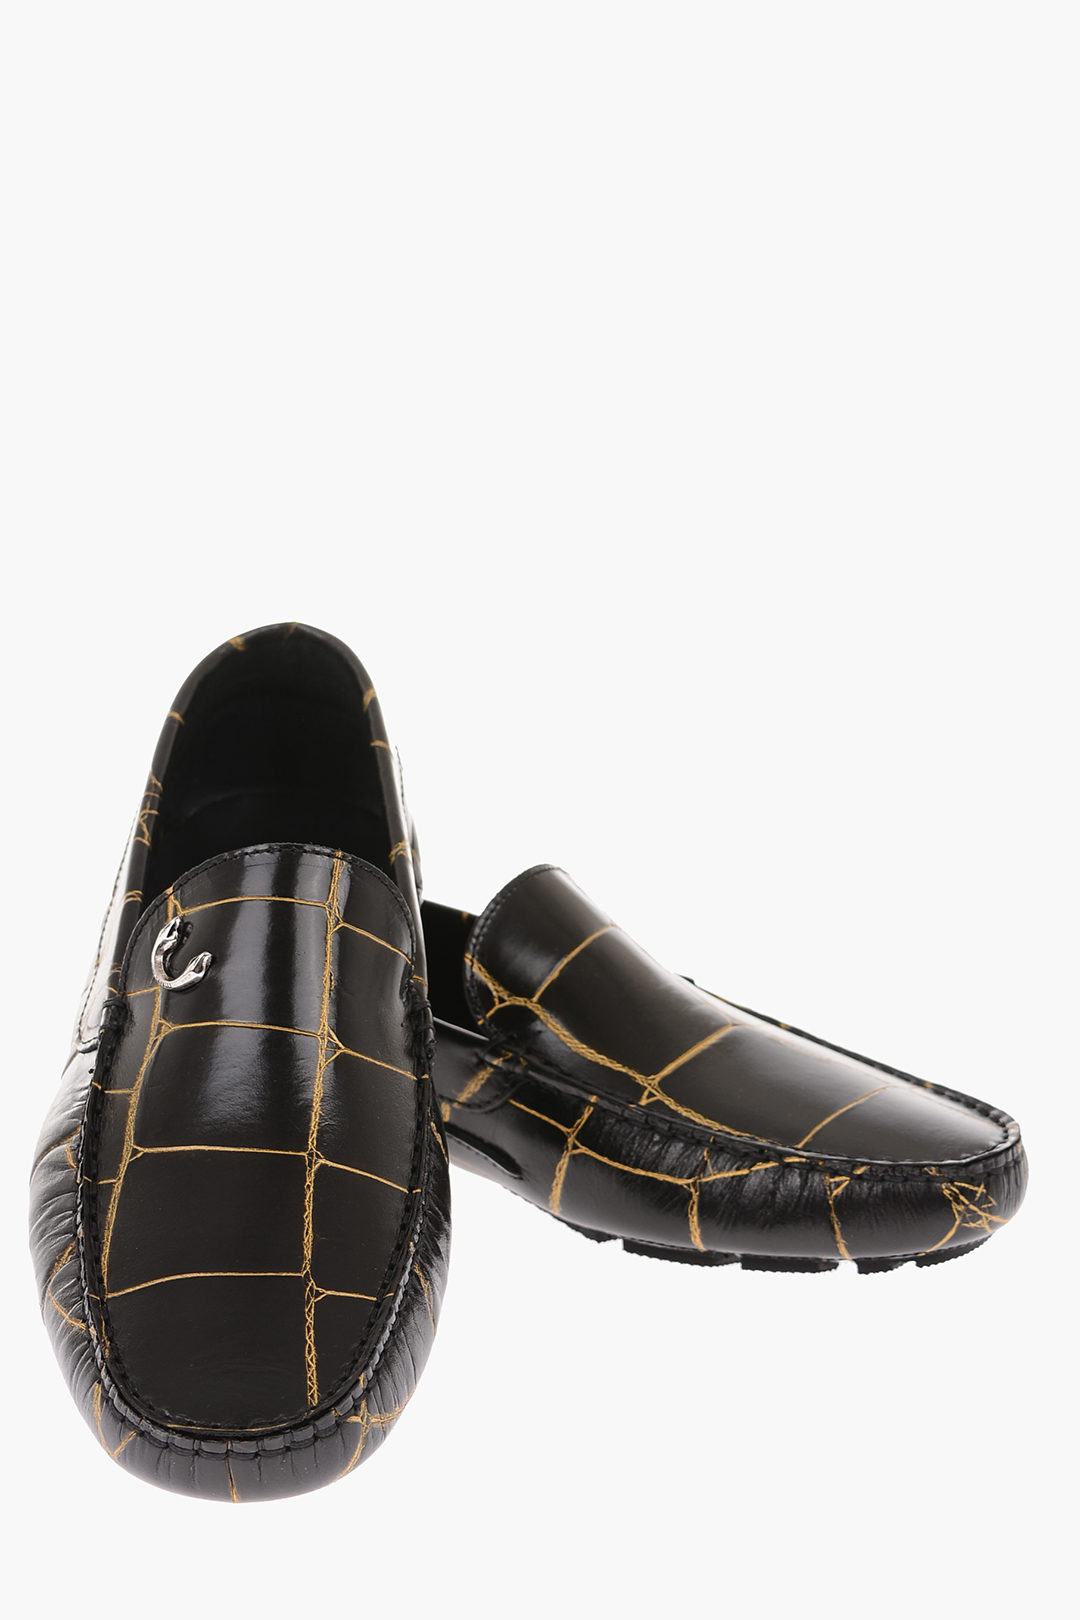 Just Cavalli Leather Loafers men - Glamood Outlet